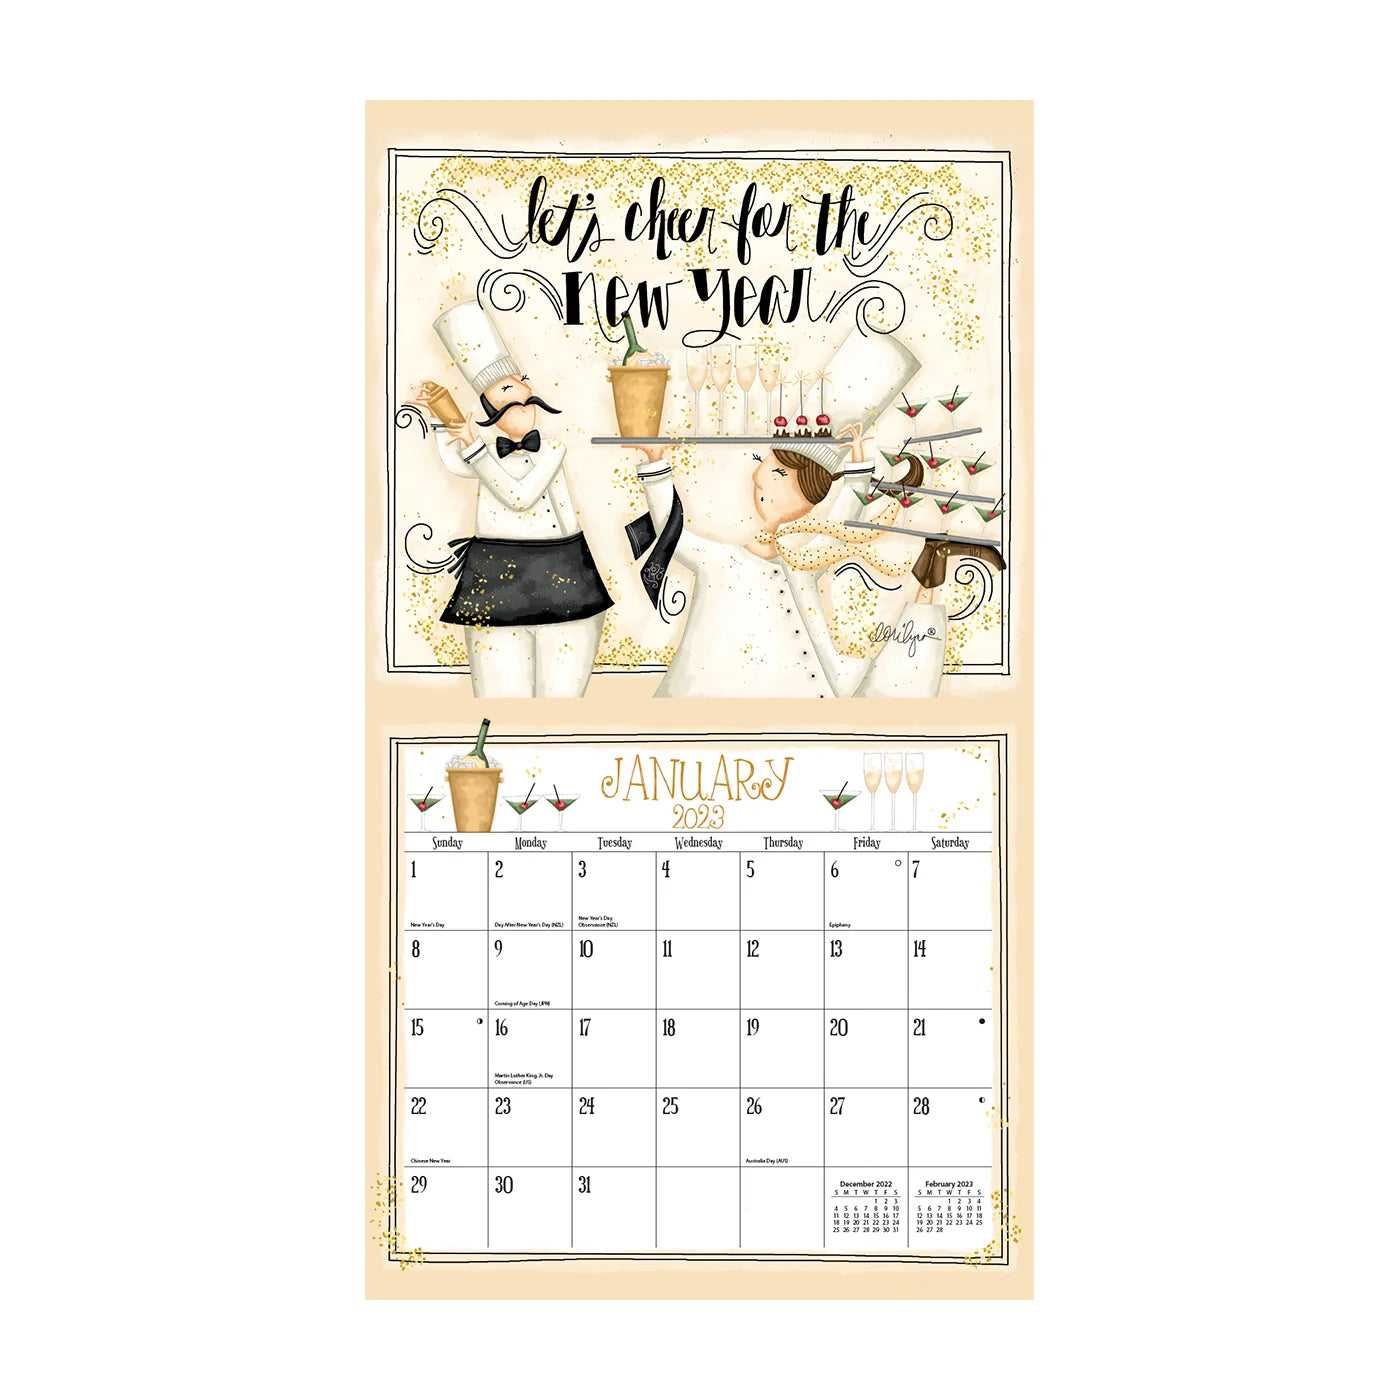 2023 LANG Love to Cook by LoriLynn Simms - Deluxe Wall Calendar